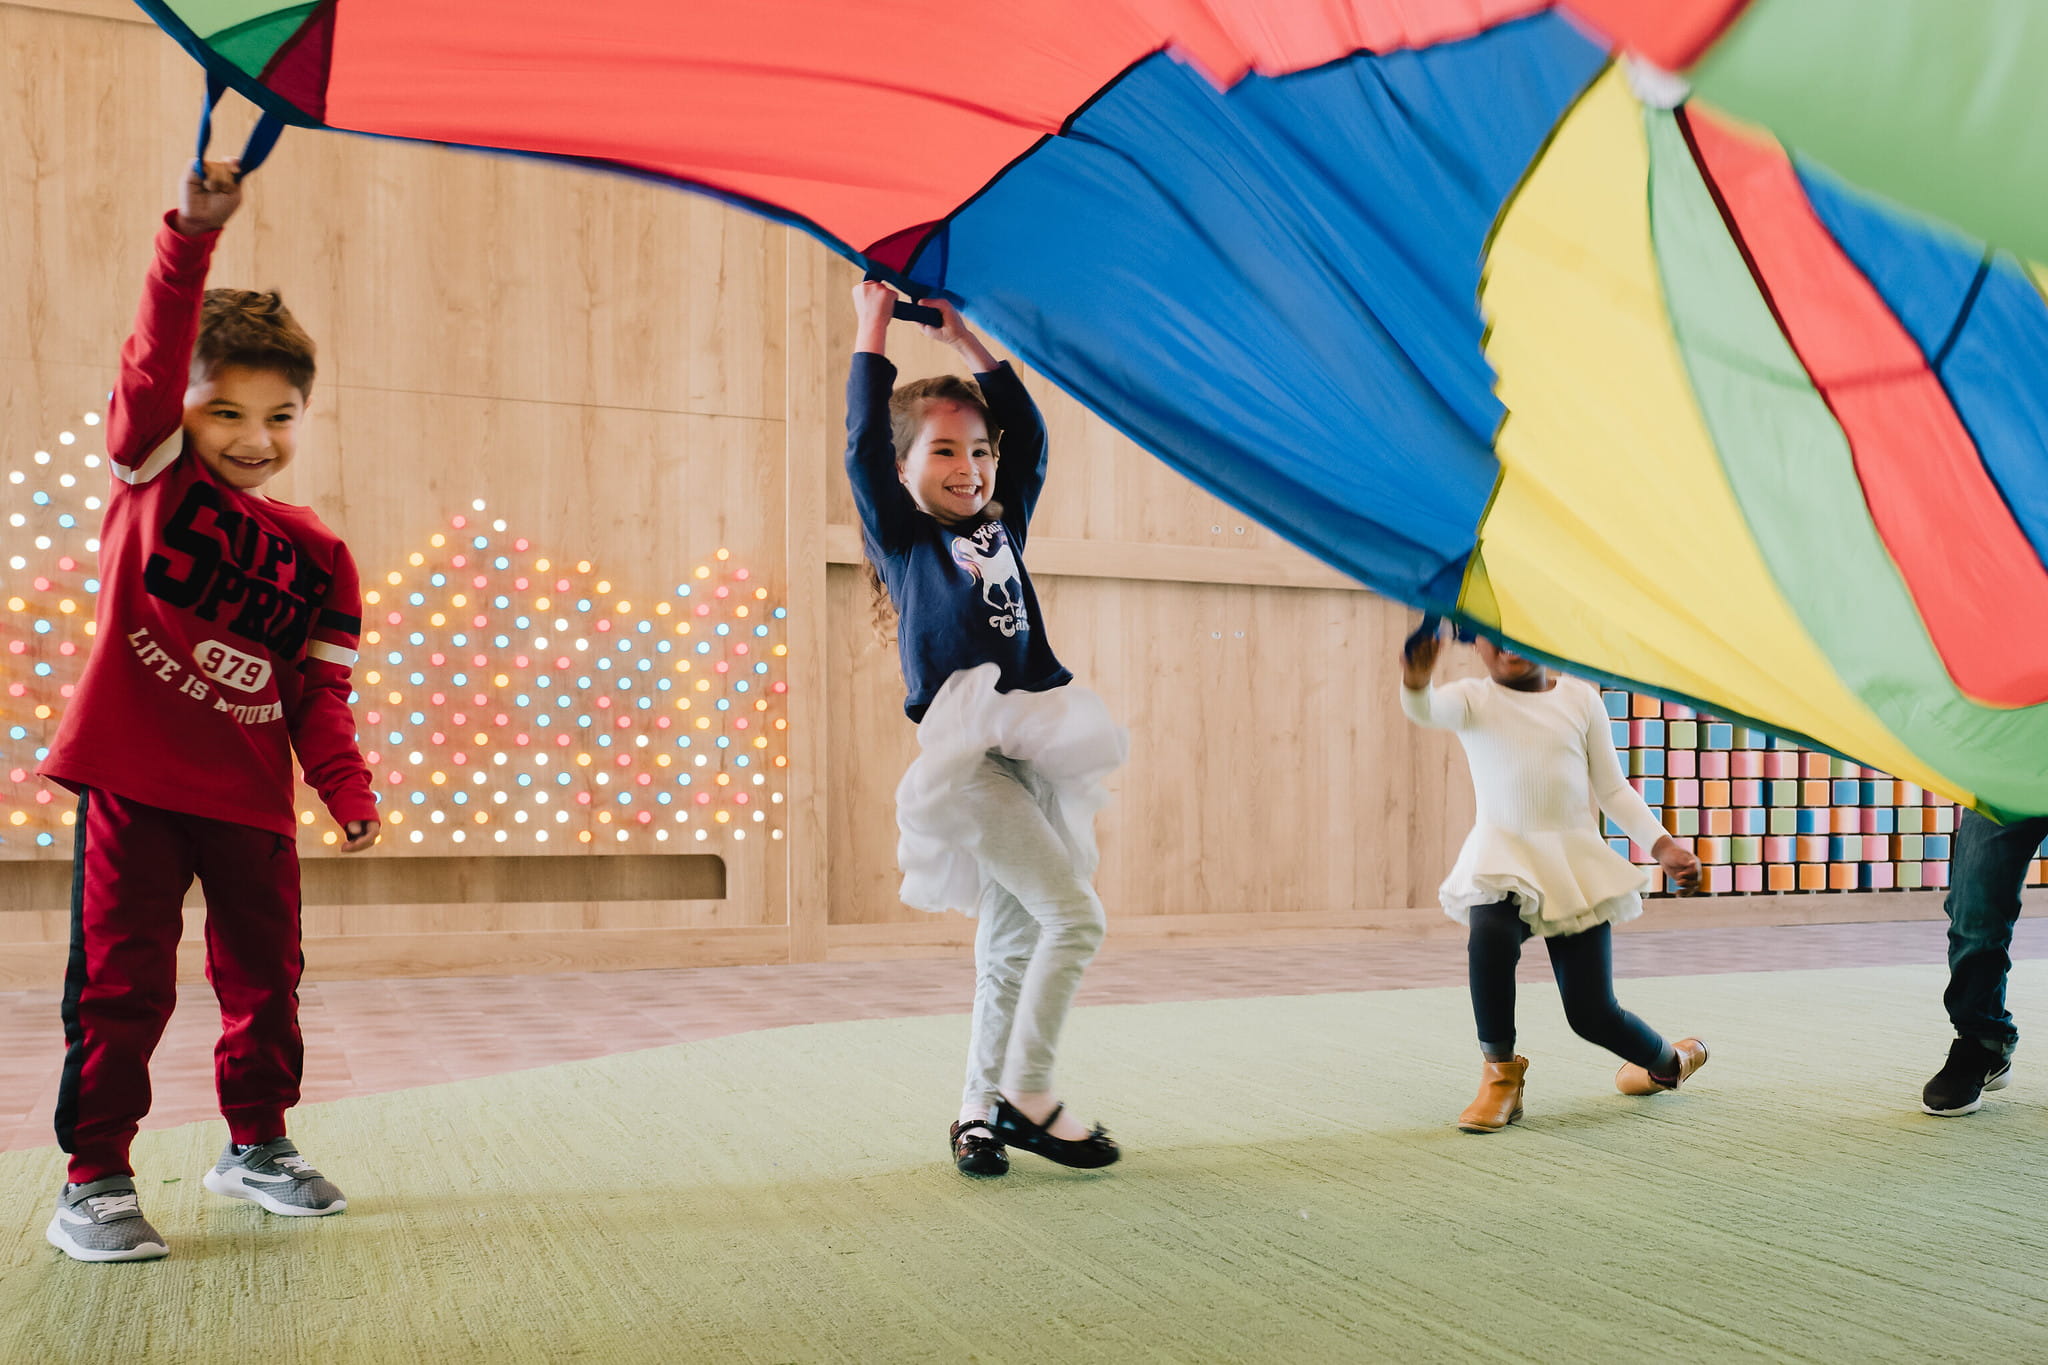 Children playing with a rainbow parachute